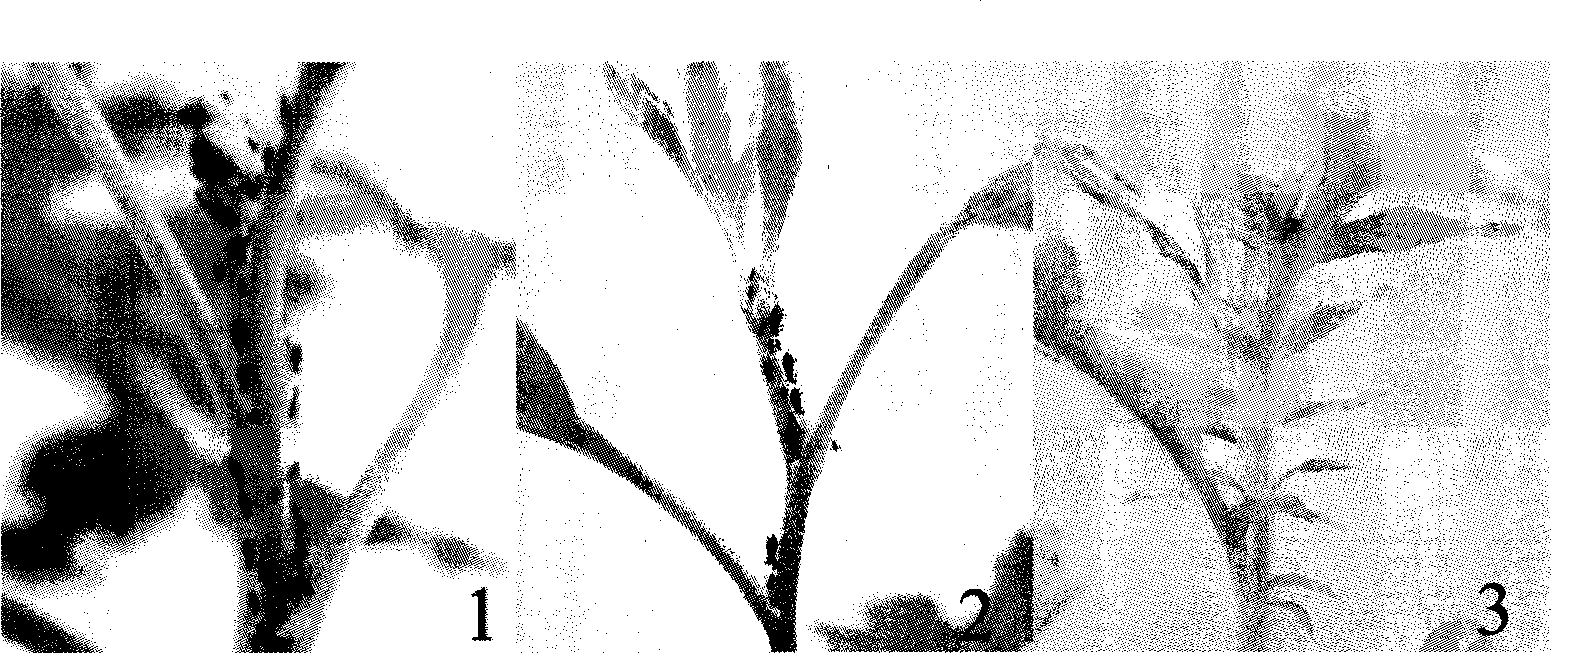 Method for identifying aphis resistance of chrysanthemum by artificial inoculation